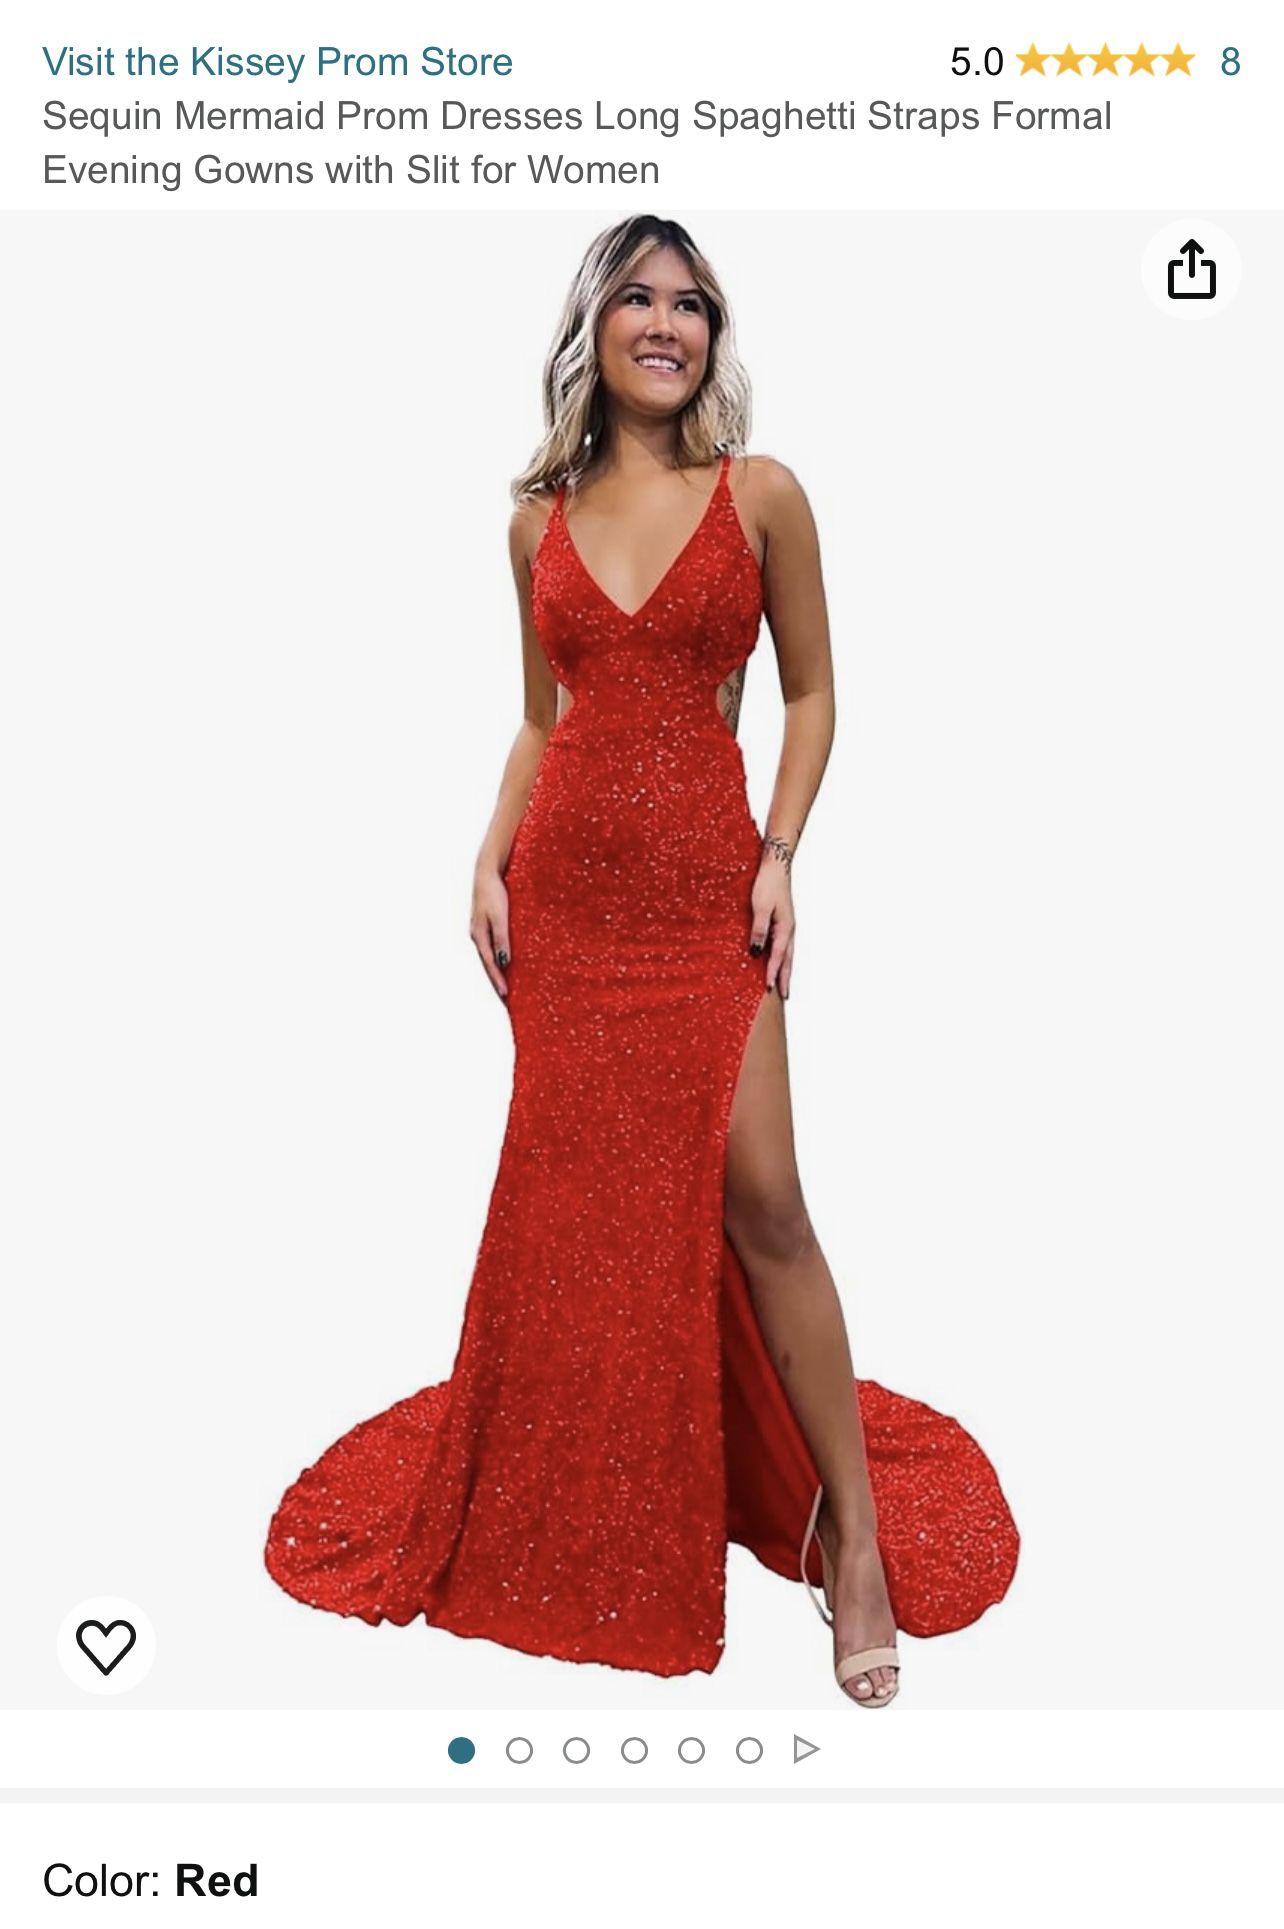 Red Sparkly Prom/Formal Dress